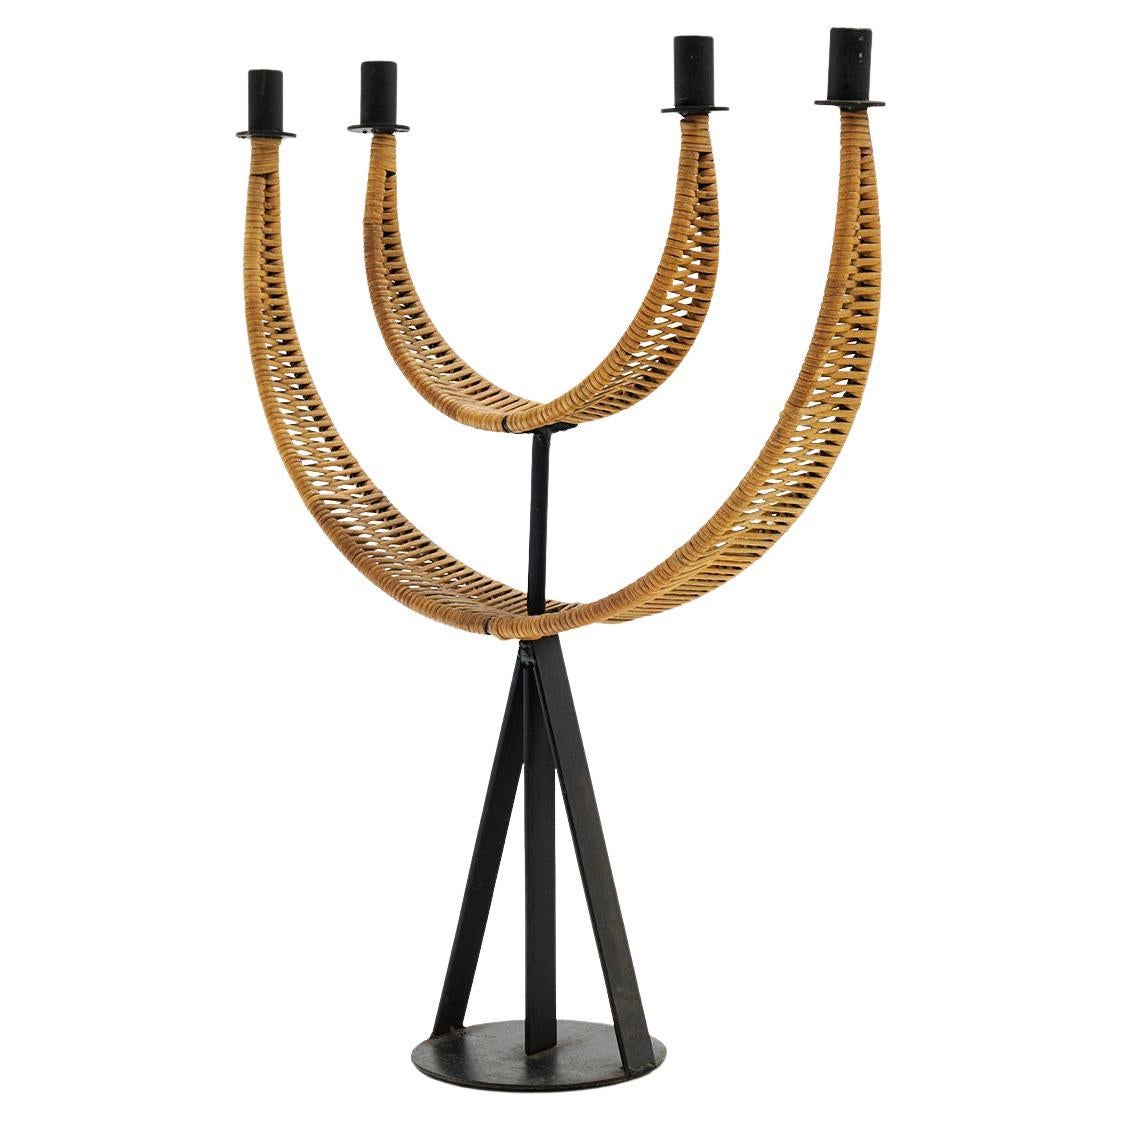 Four Candle Candelabra in Wrought Iron and Cane by Arthur Umanoff, 1950s For Sale